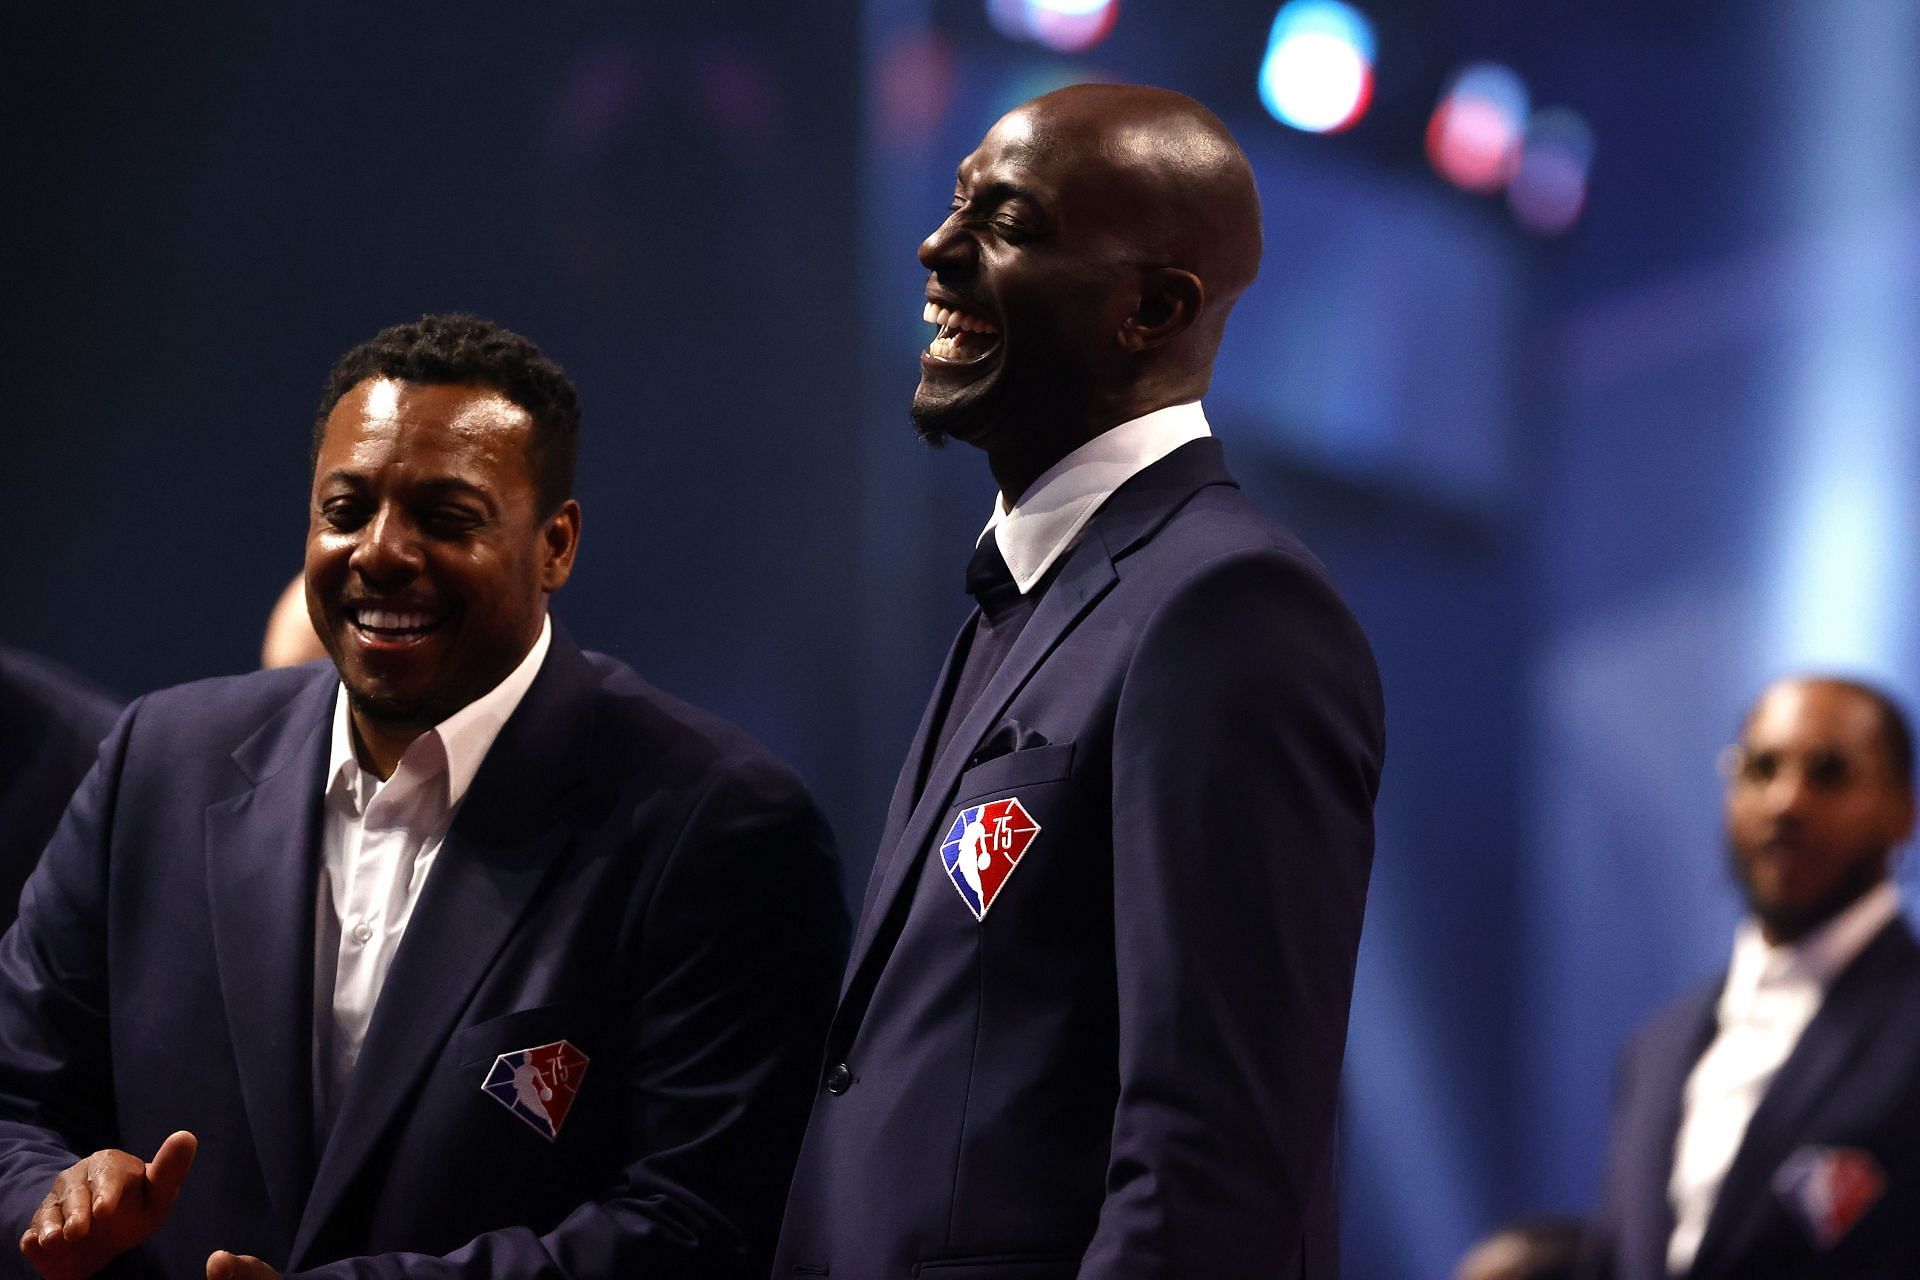 Kevin Garnett laughs with Paul Pierce during the presentation of the NBA 75th Anniversary Team